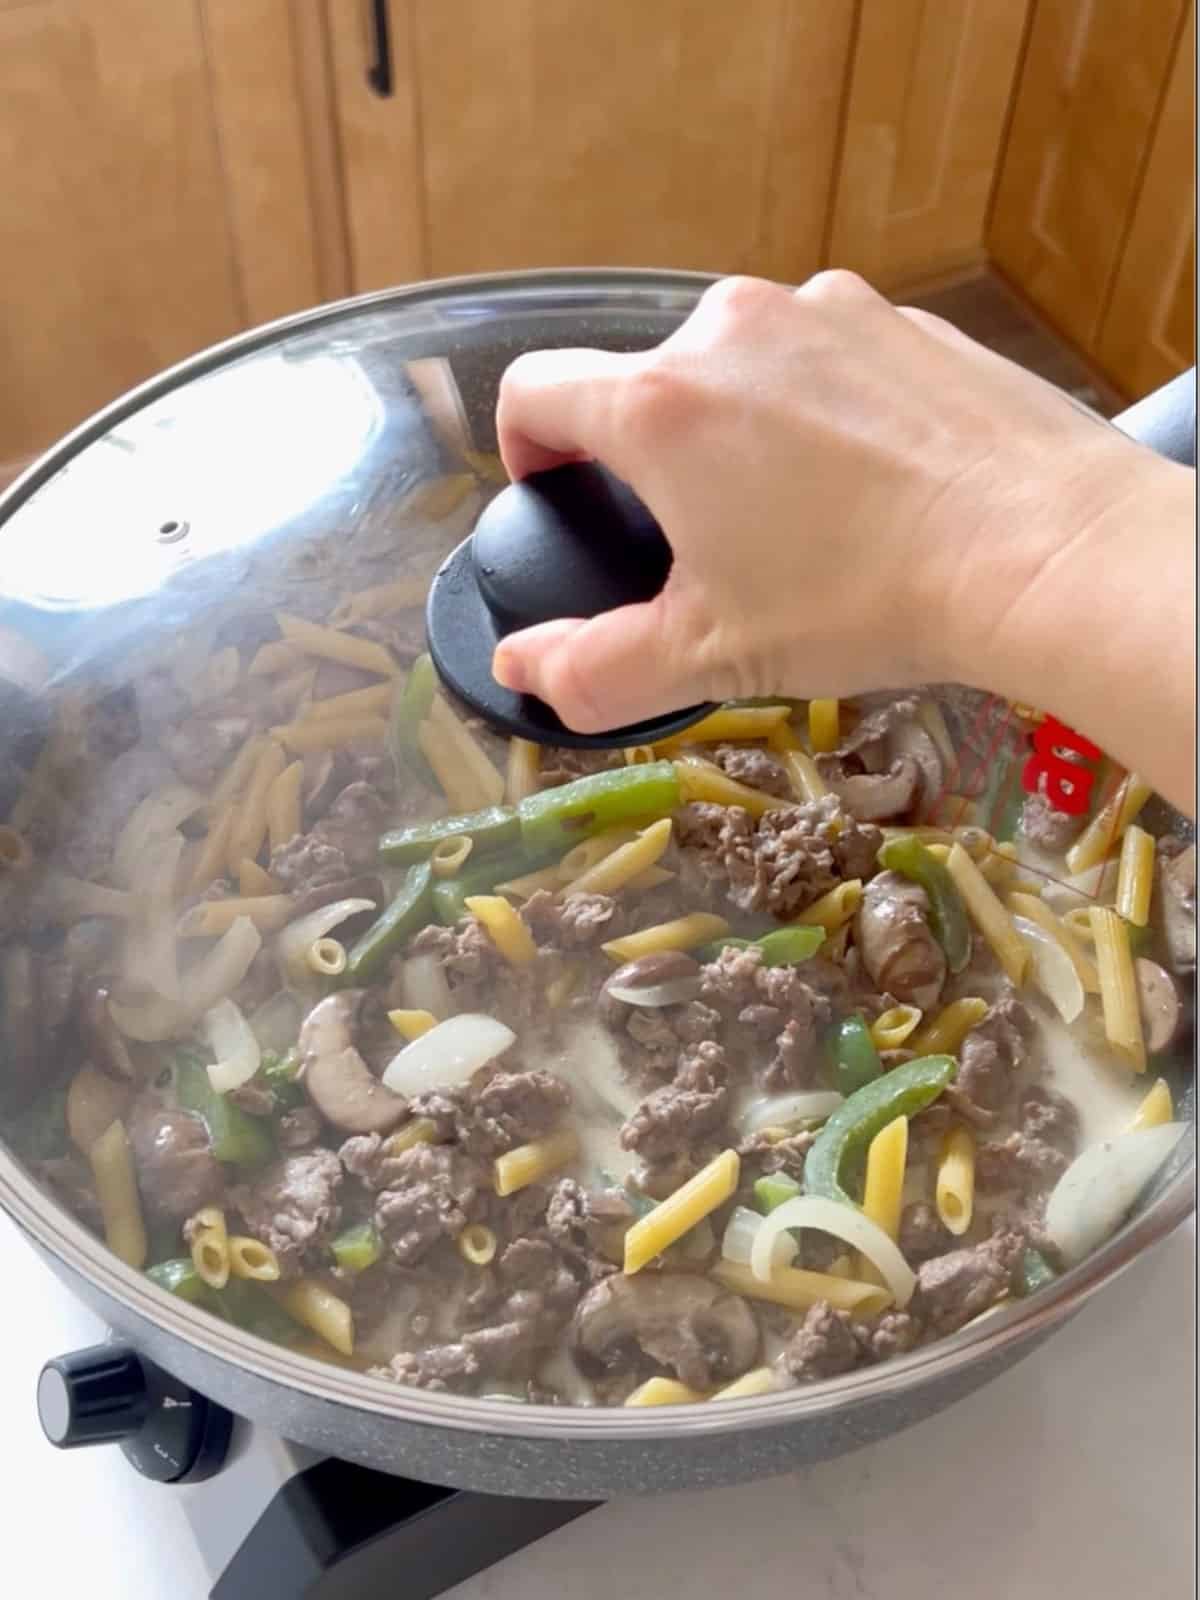 A hand putting cover onto the skillet for cooking.